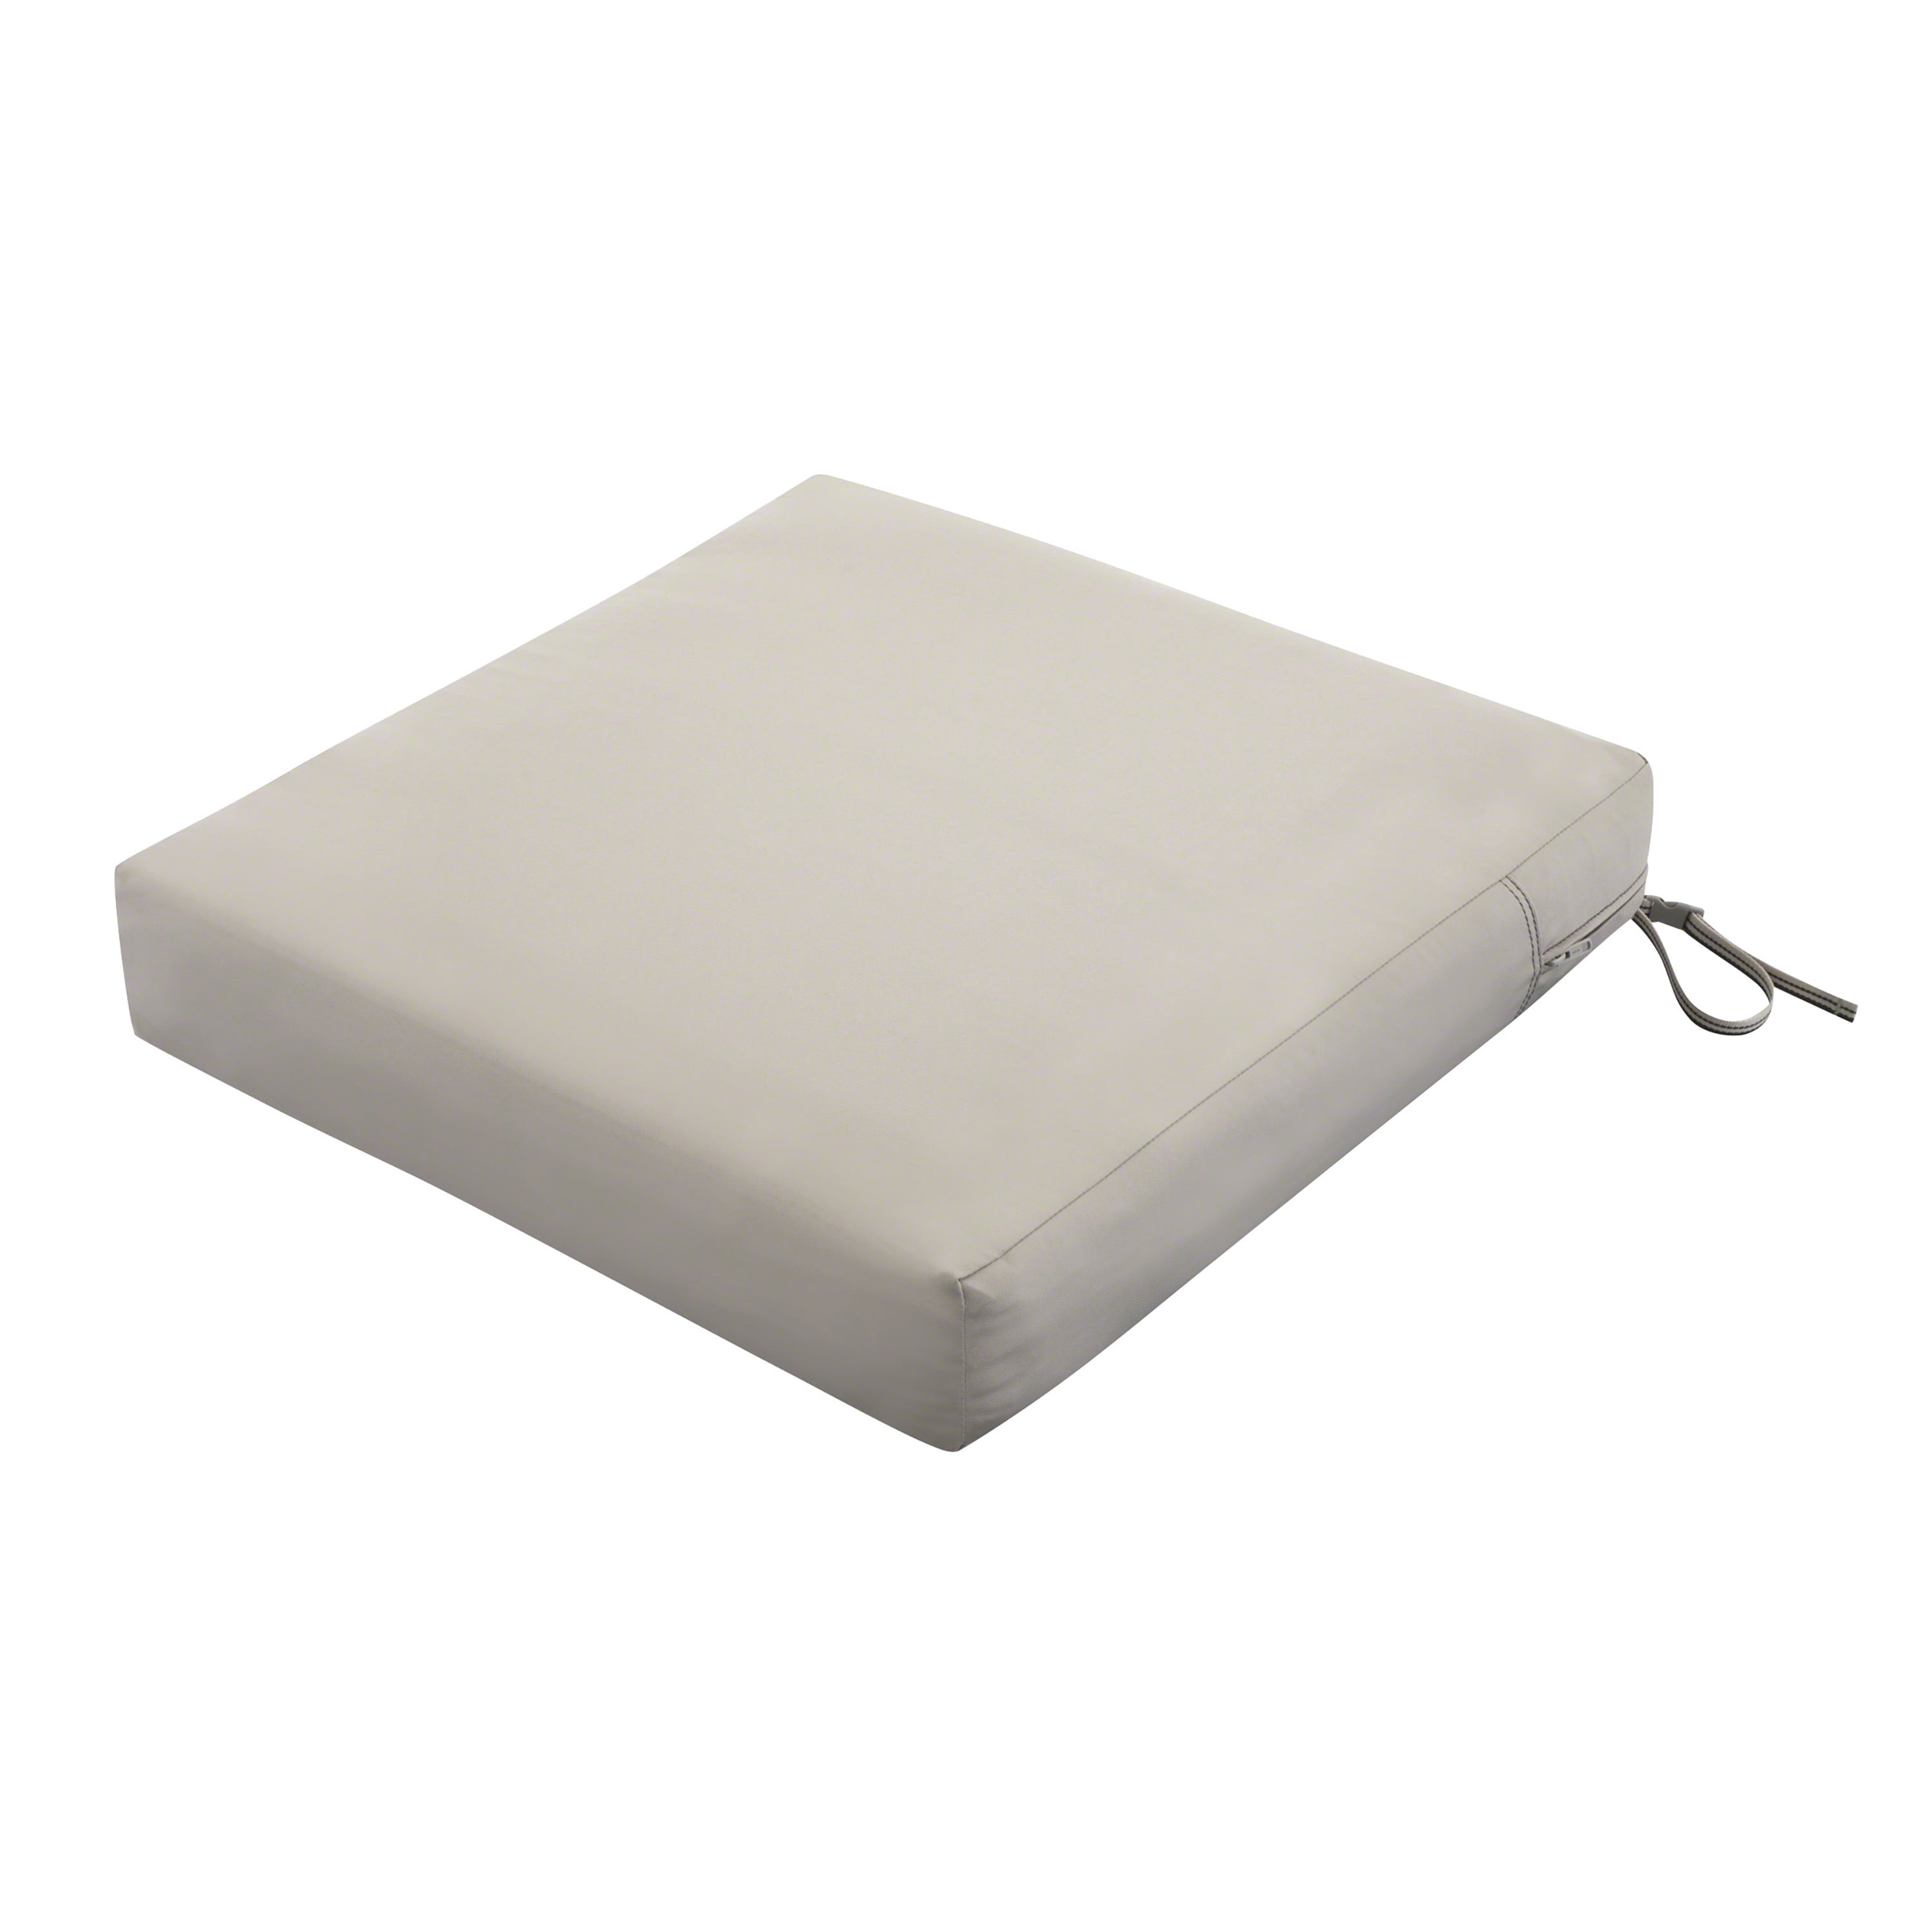  Wise 120AB Series Deck Chair Replacement Cushions and Arm  Pads, White : Sports & Outdoors